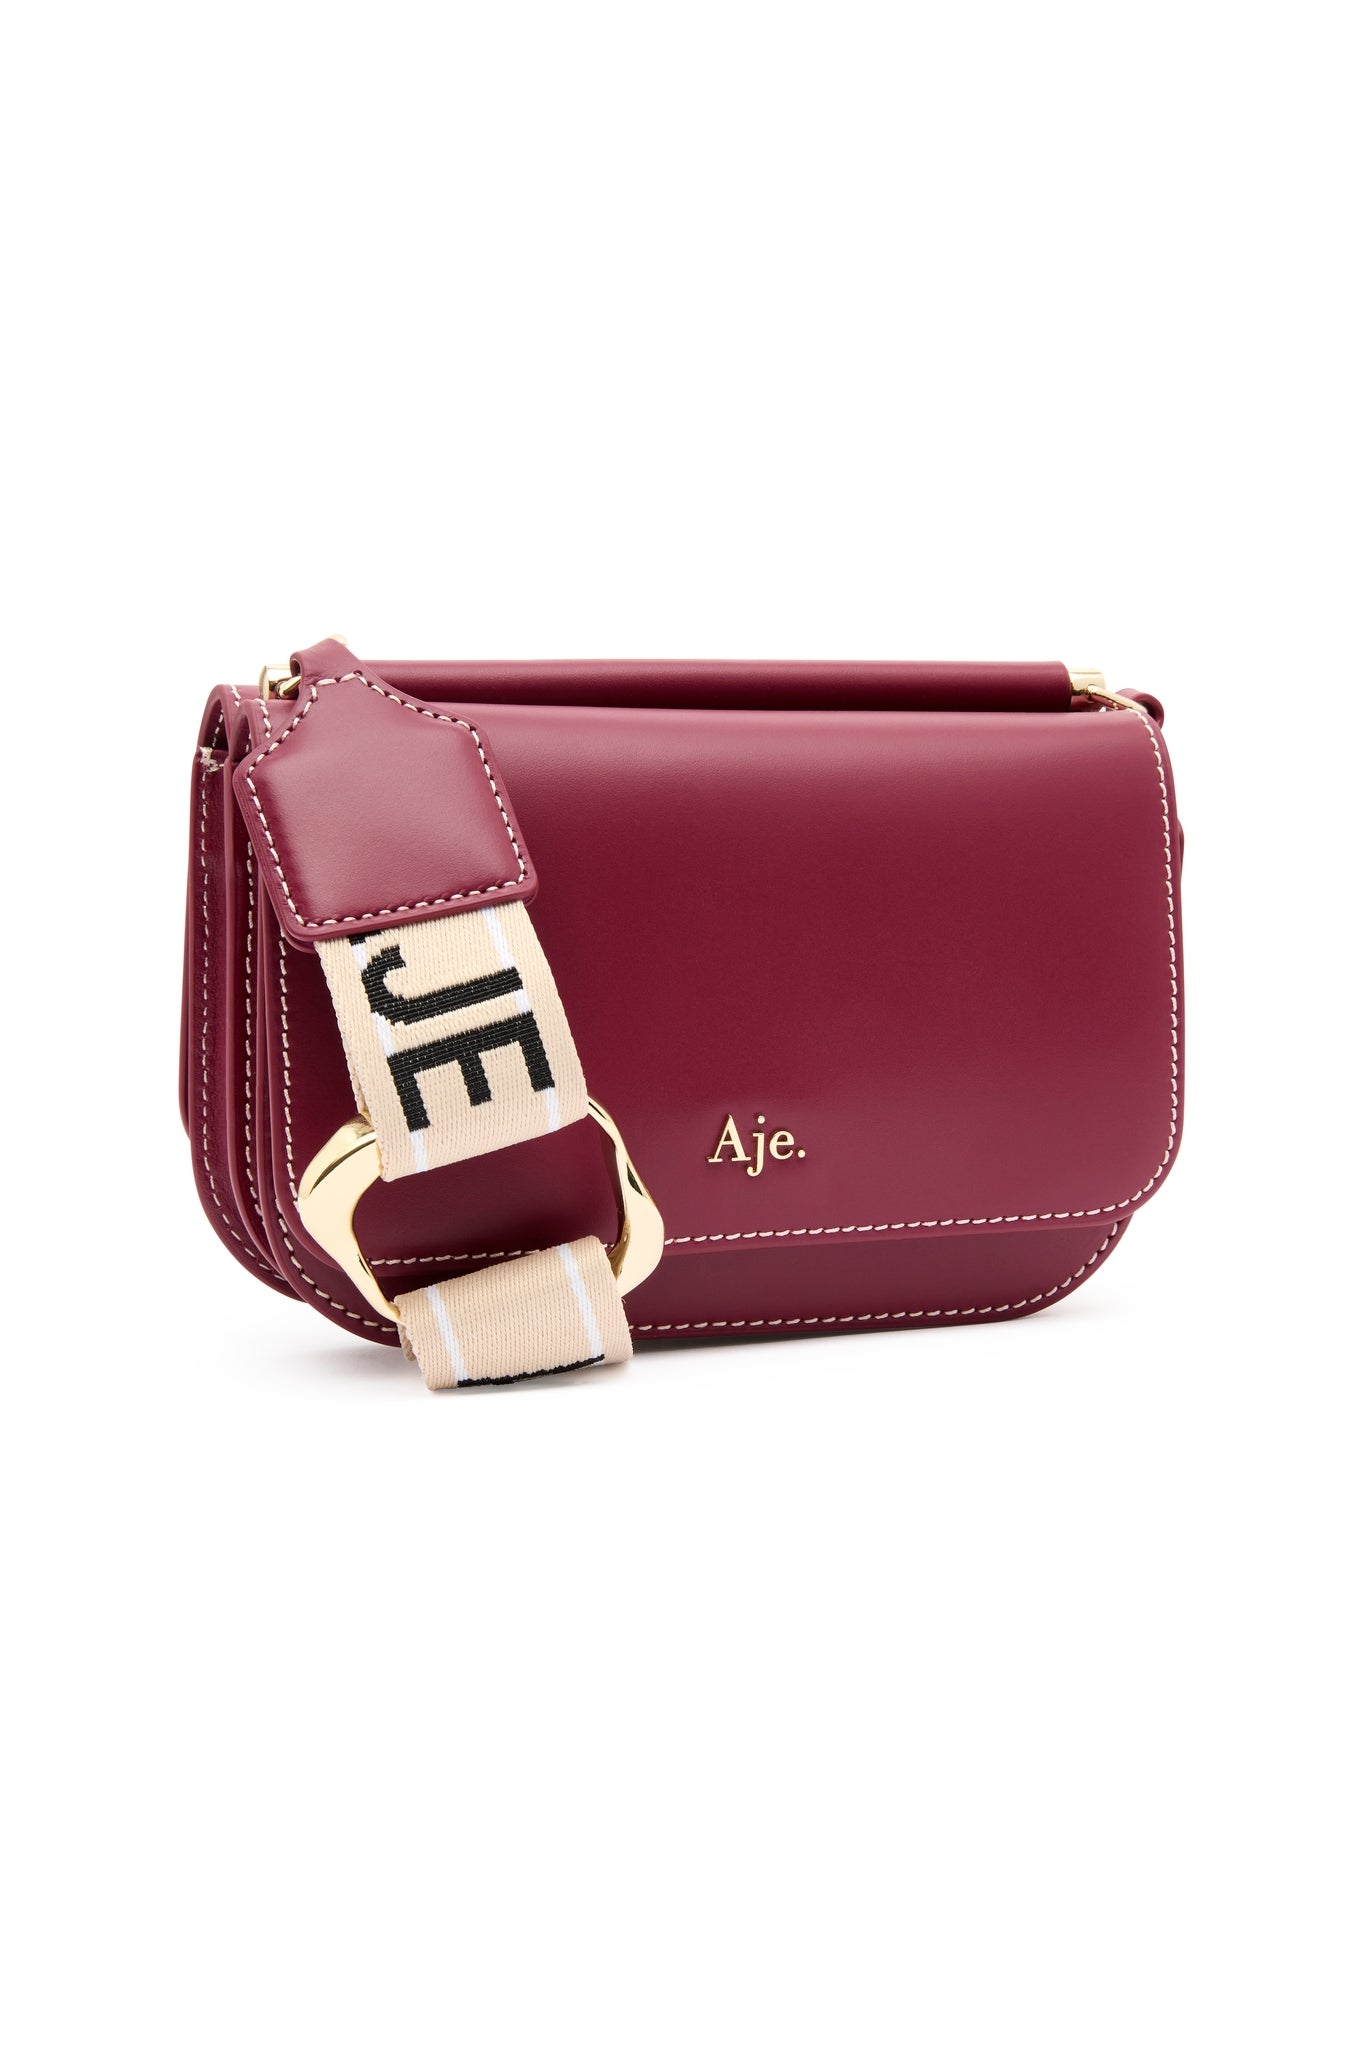 This Leather Crossbody Purse Is as Little as $22 on